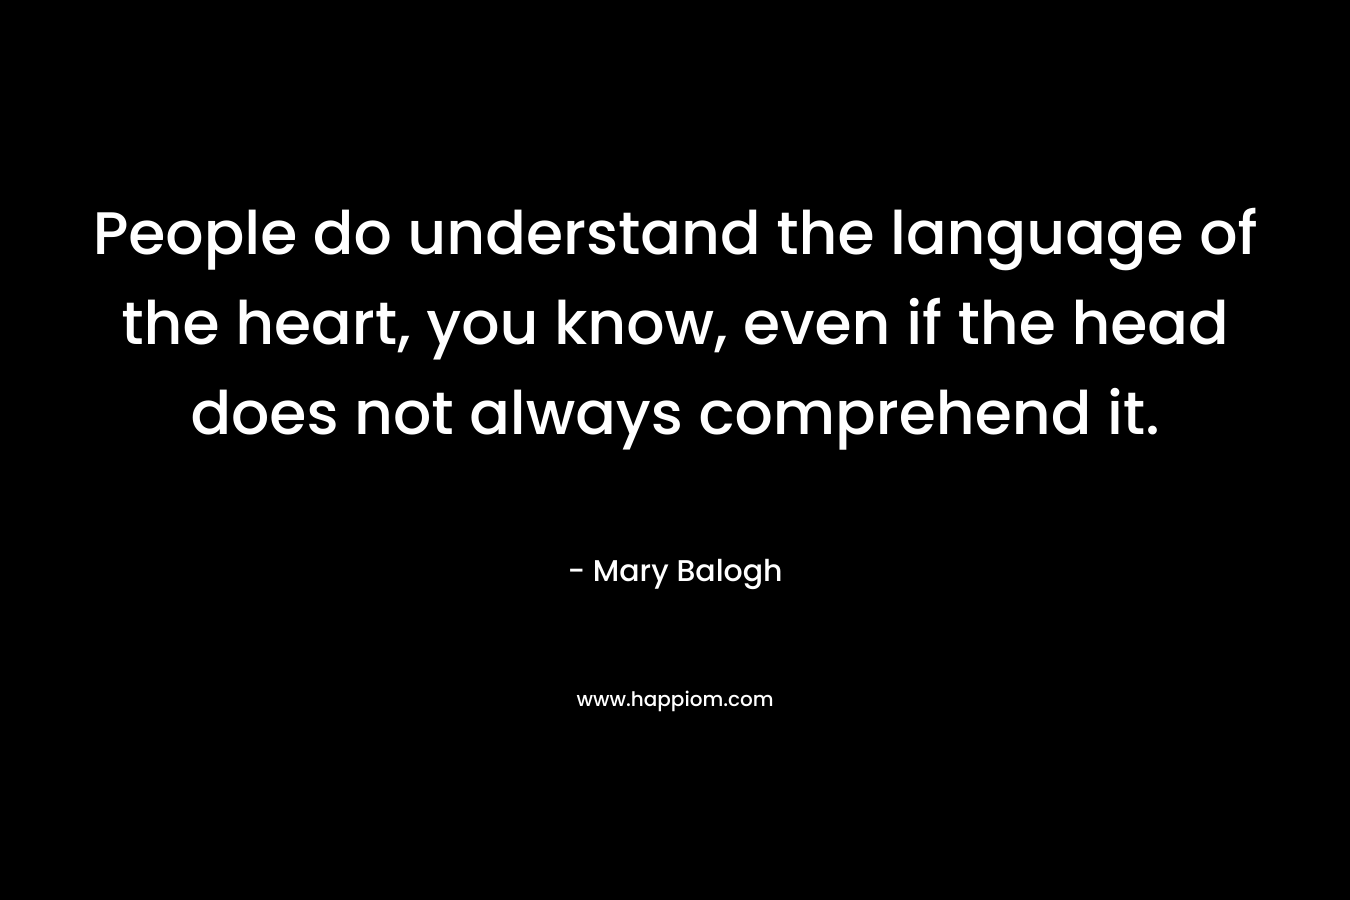 People do understand the language of the heart, you know, even if the head does not always comprehend it. – Mary Balogh